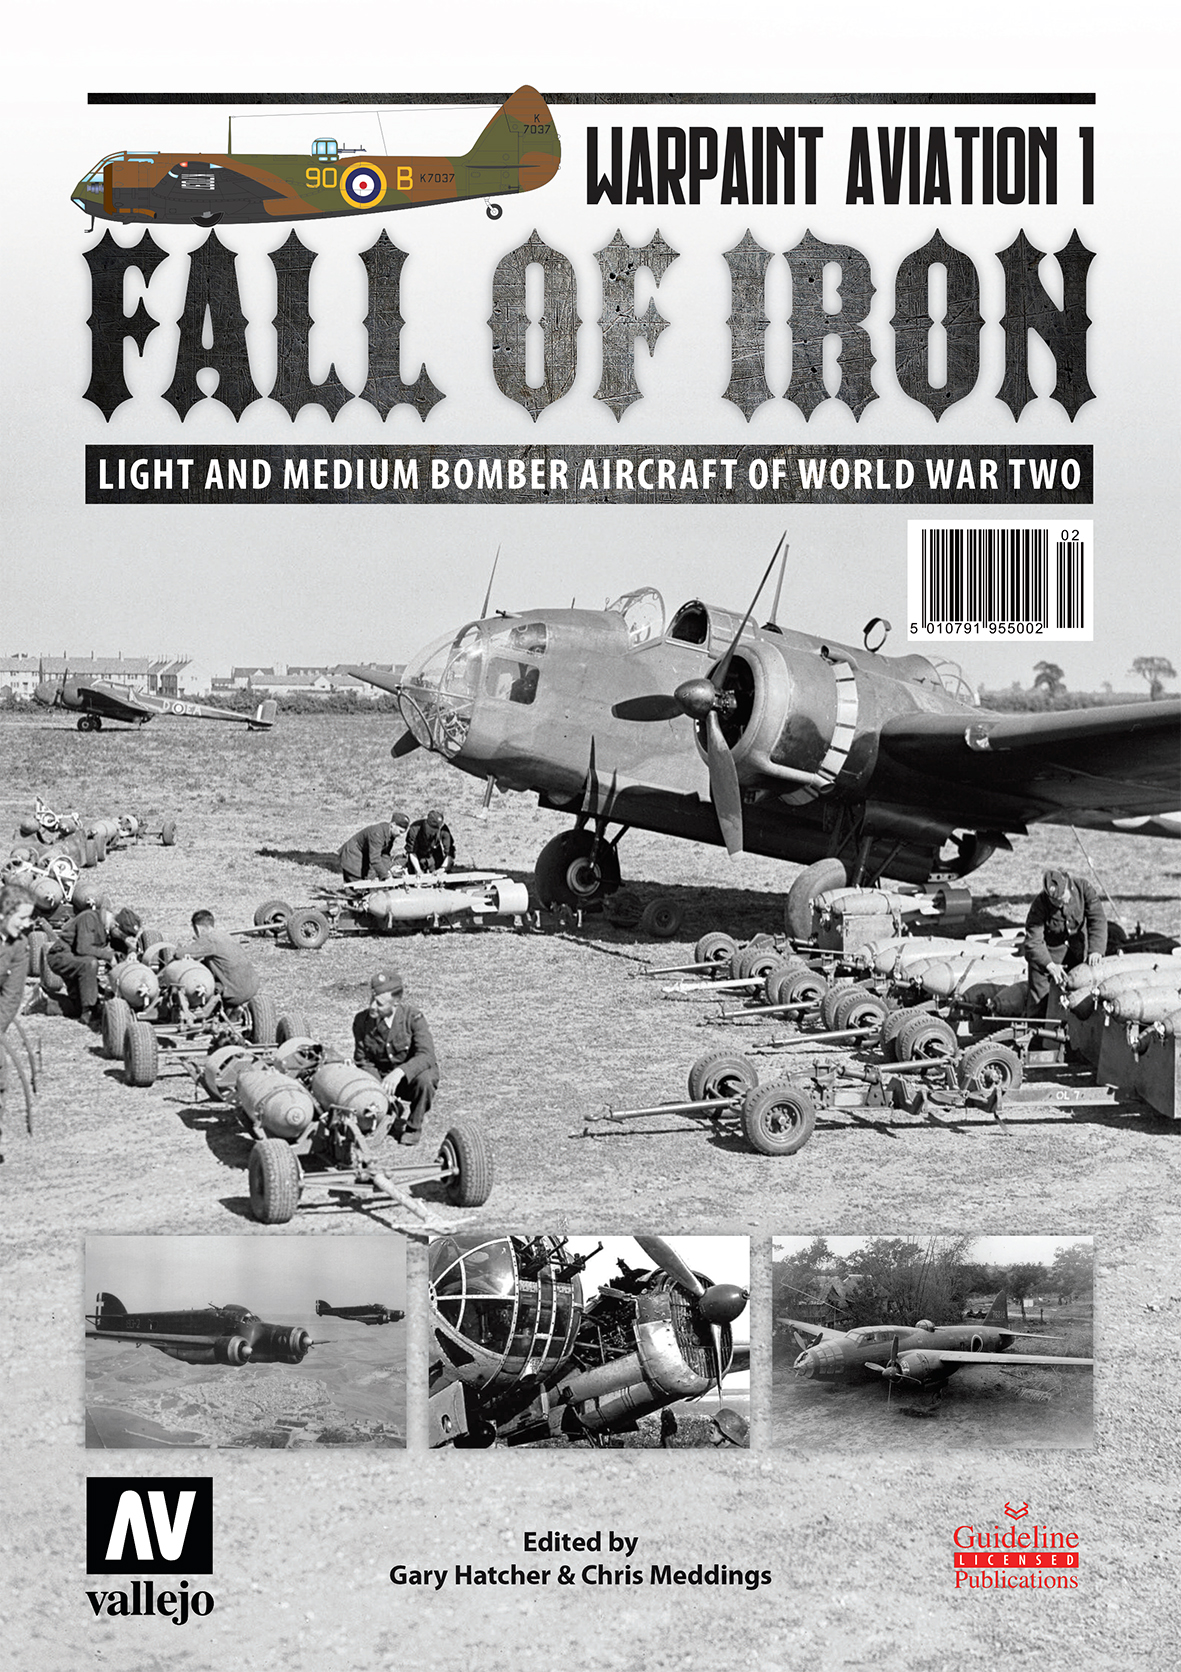 Guideline Publications USA Fall of Iron Light and Medium bomber aircraft of World War 2 